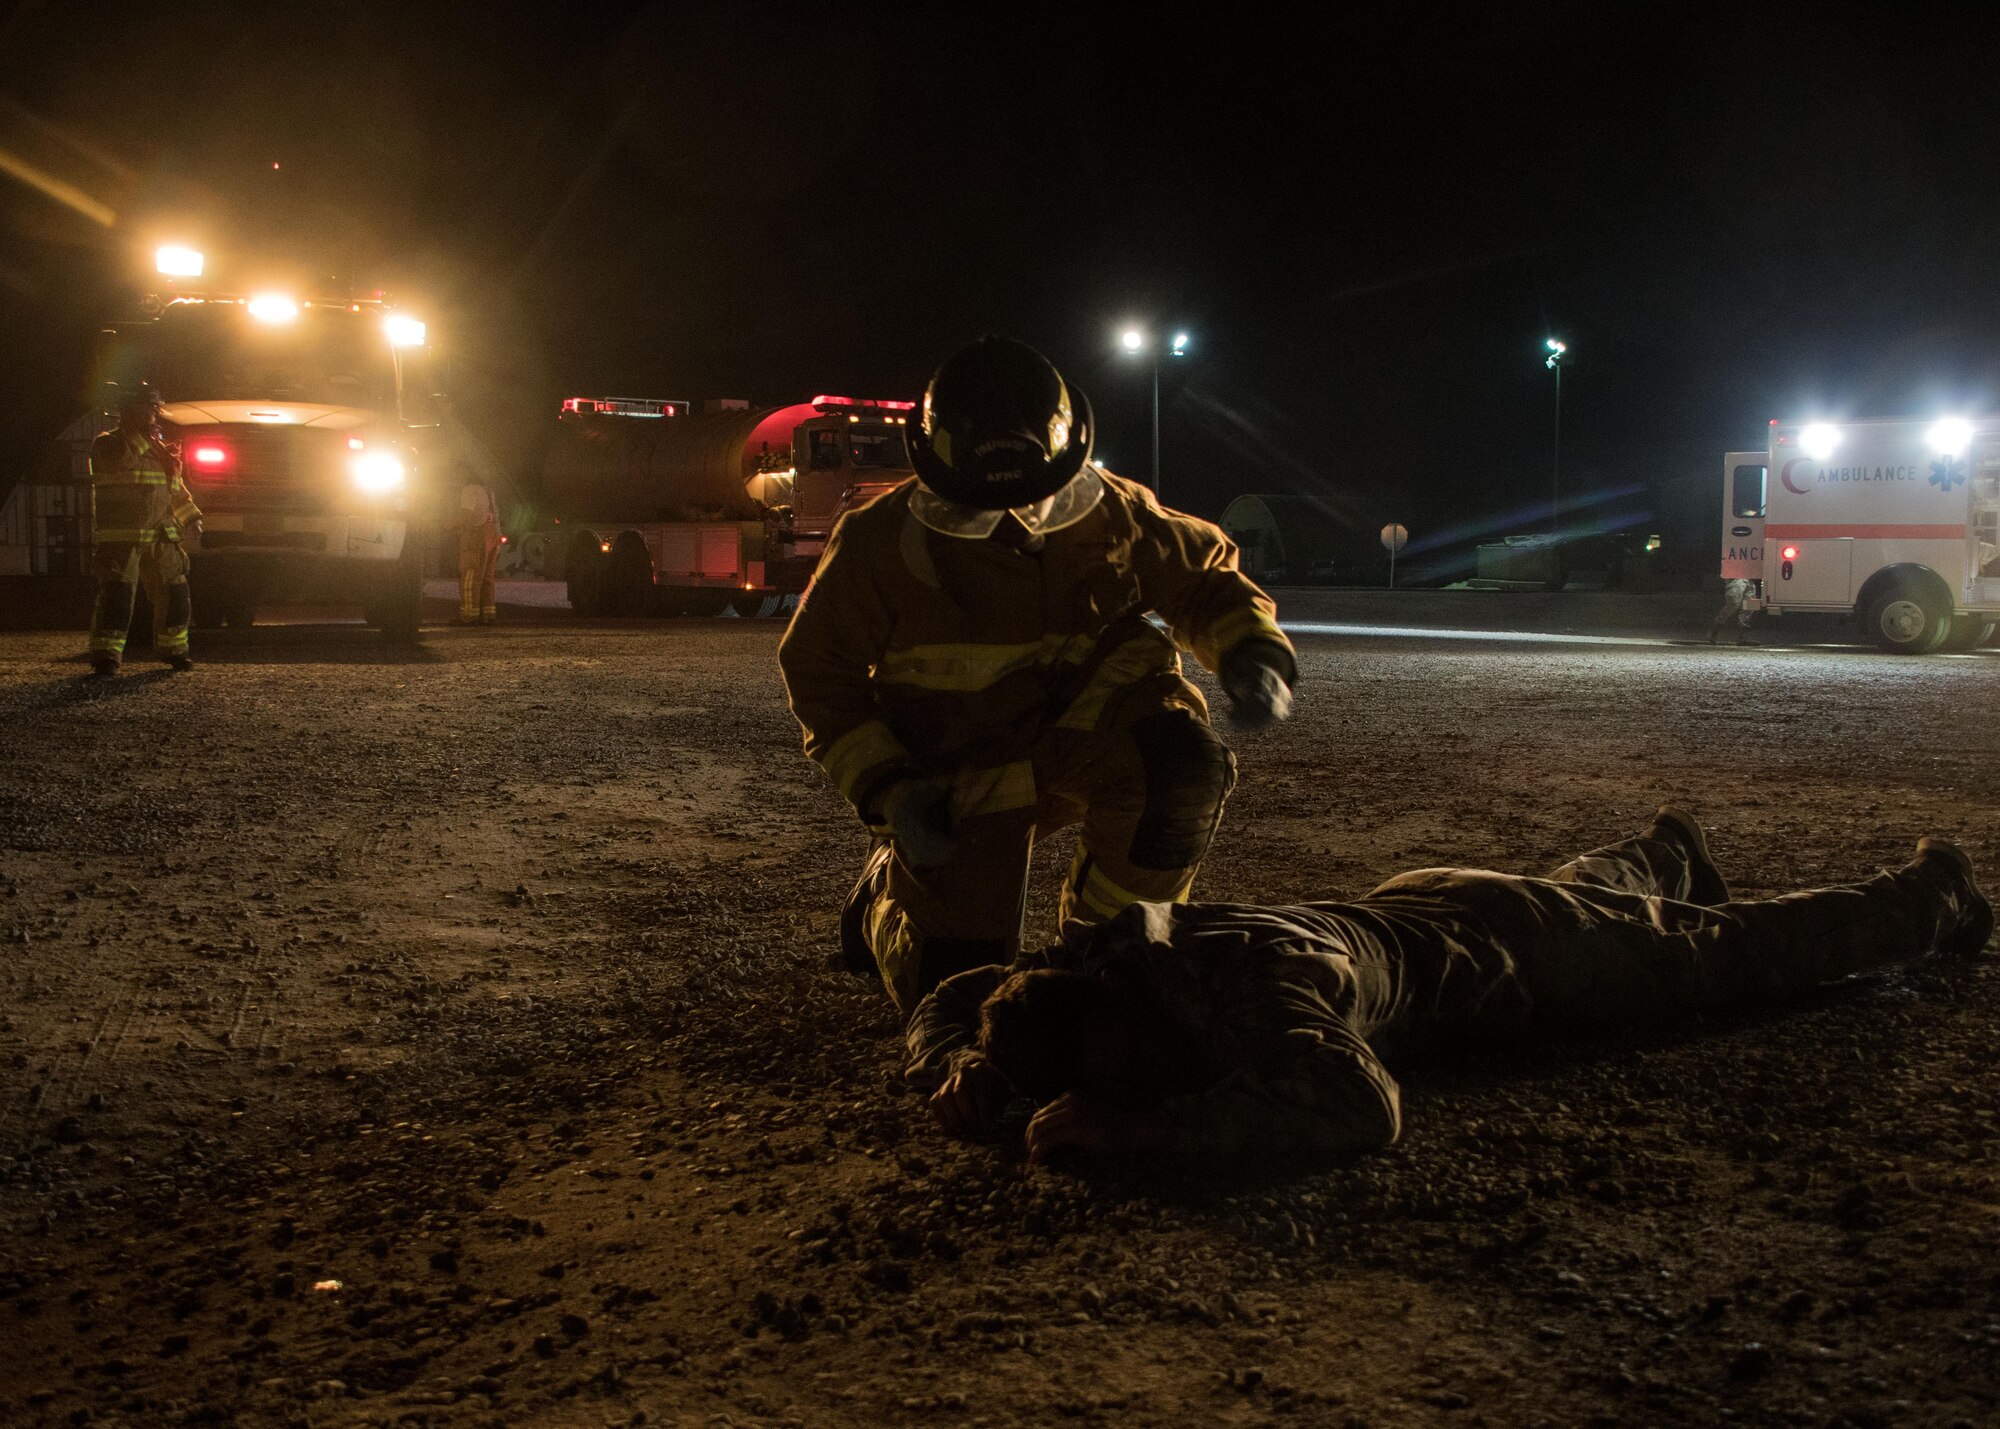 Senior Airman Derek Holmes, a 386th Expeditionary Civil Engineer Squadron firefighter, conducts an initial patient assessment during a drill at an undisclosed location in Southwest Asia March 10, 2017. He simulated checking for major injuries and determining whether the patient was conscious. (U.S. Air Force photo/Senior Airman Andrew Park)